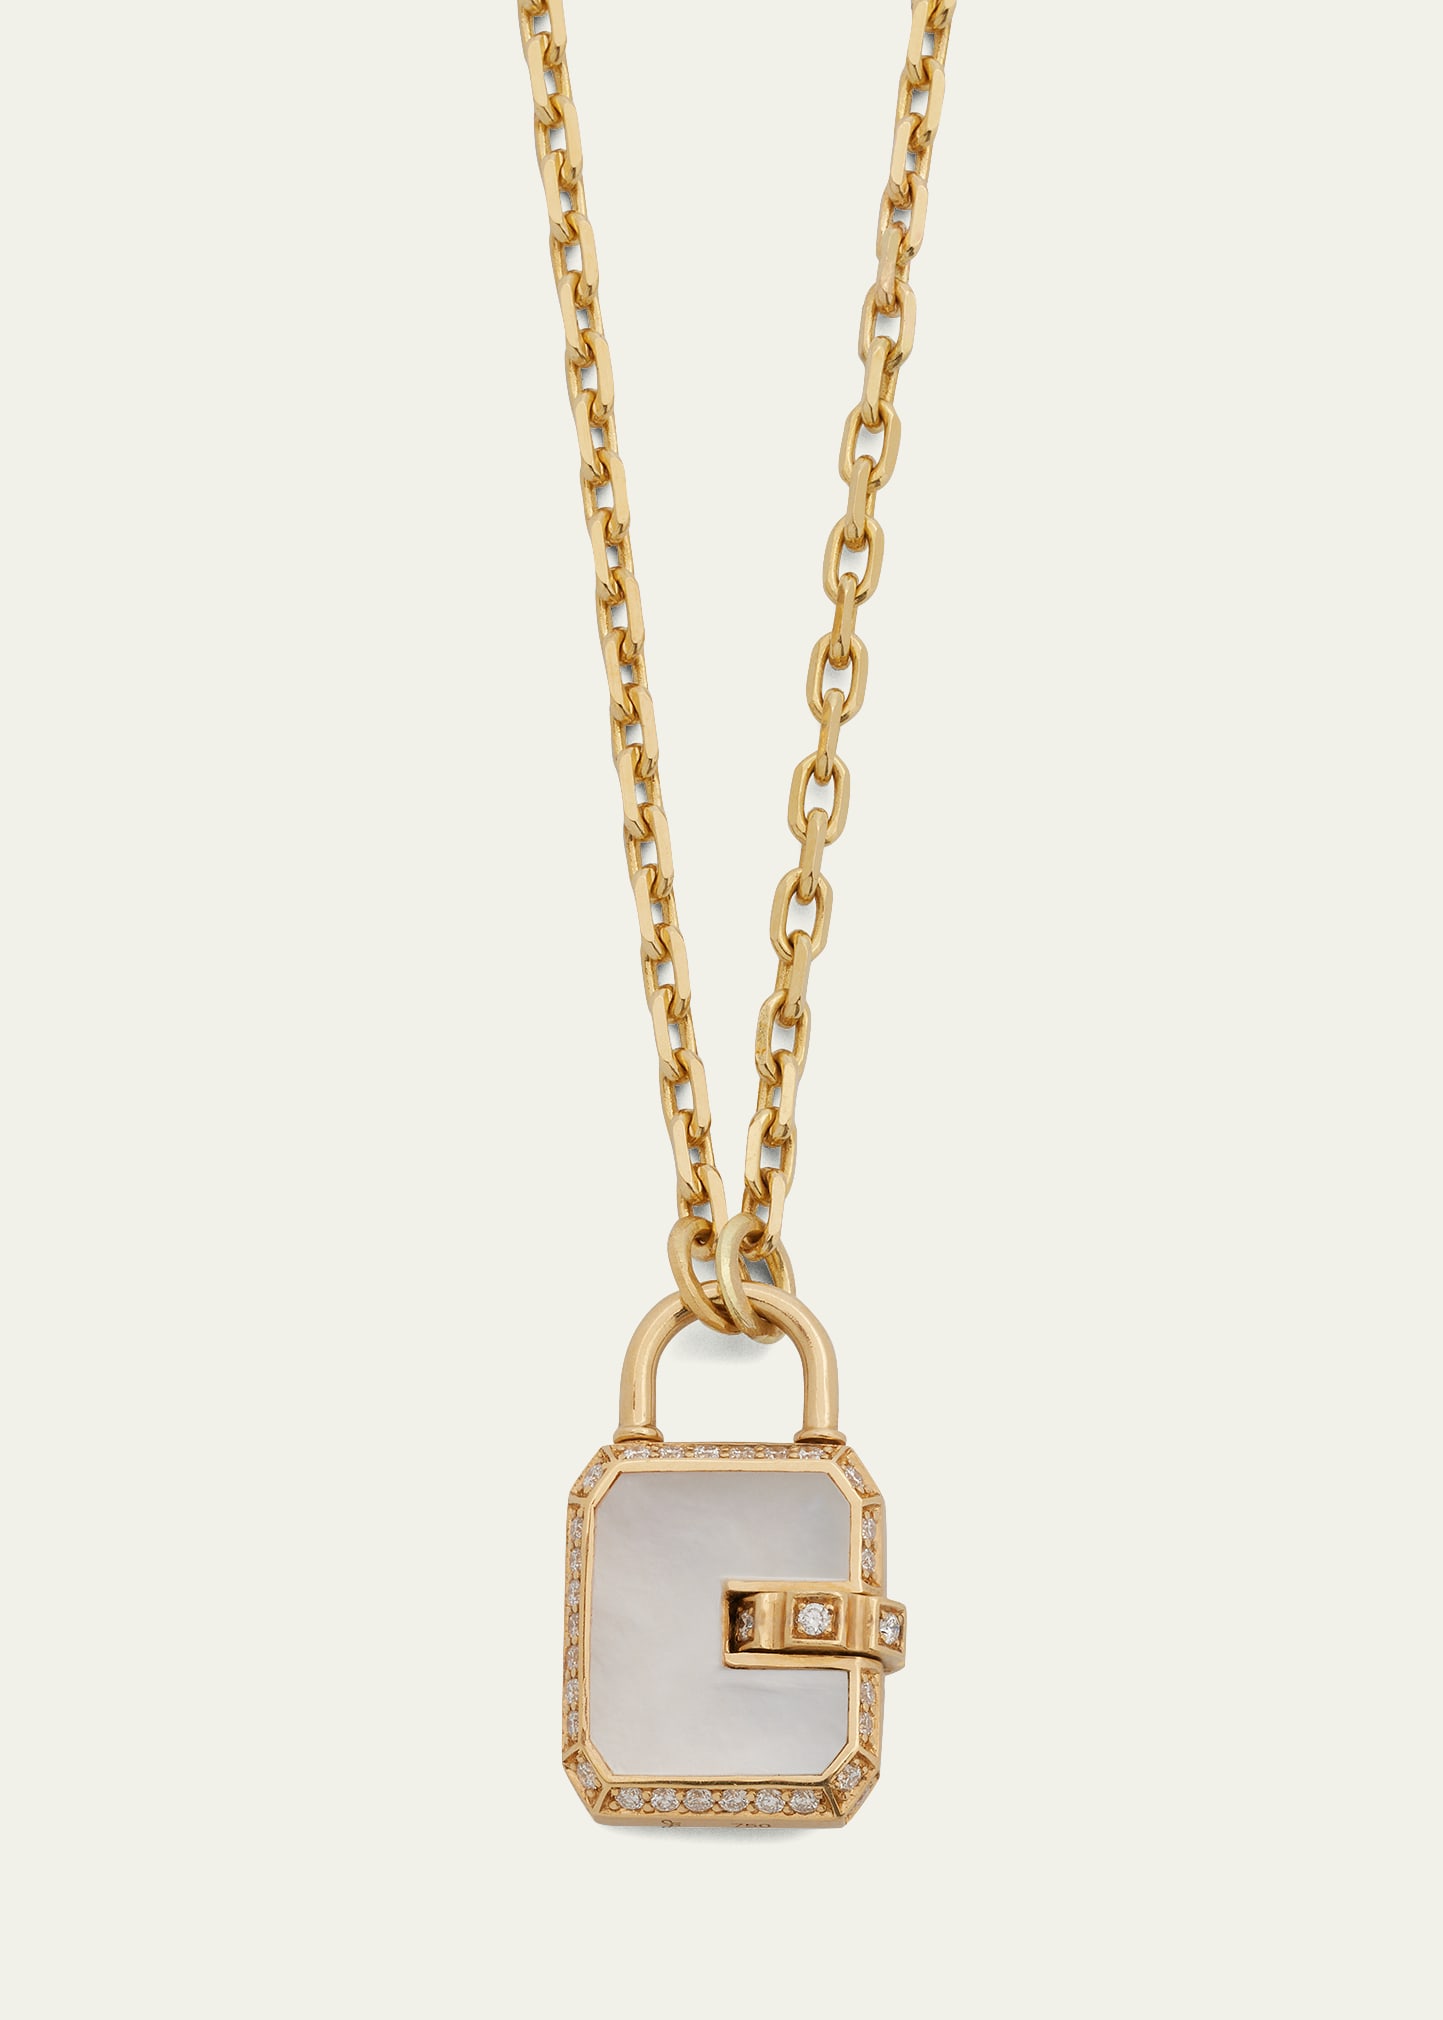 Mini Padlock Pendant with Mother-of-Pearl, Diamonds and 18K Yellow Gold